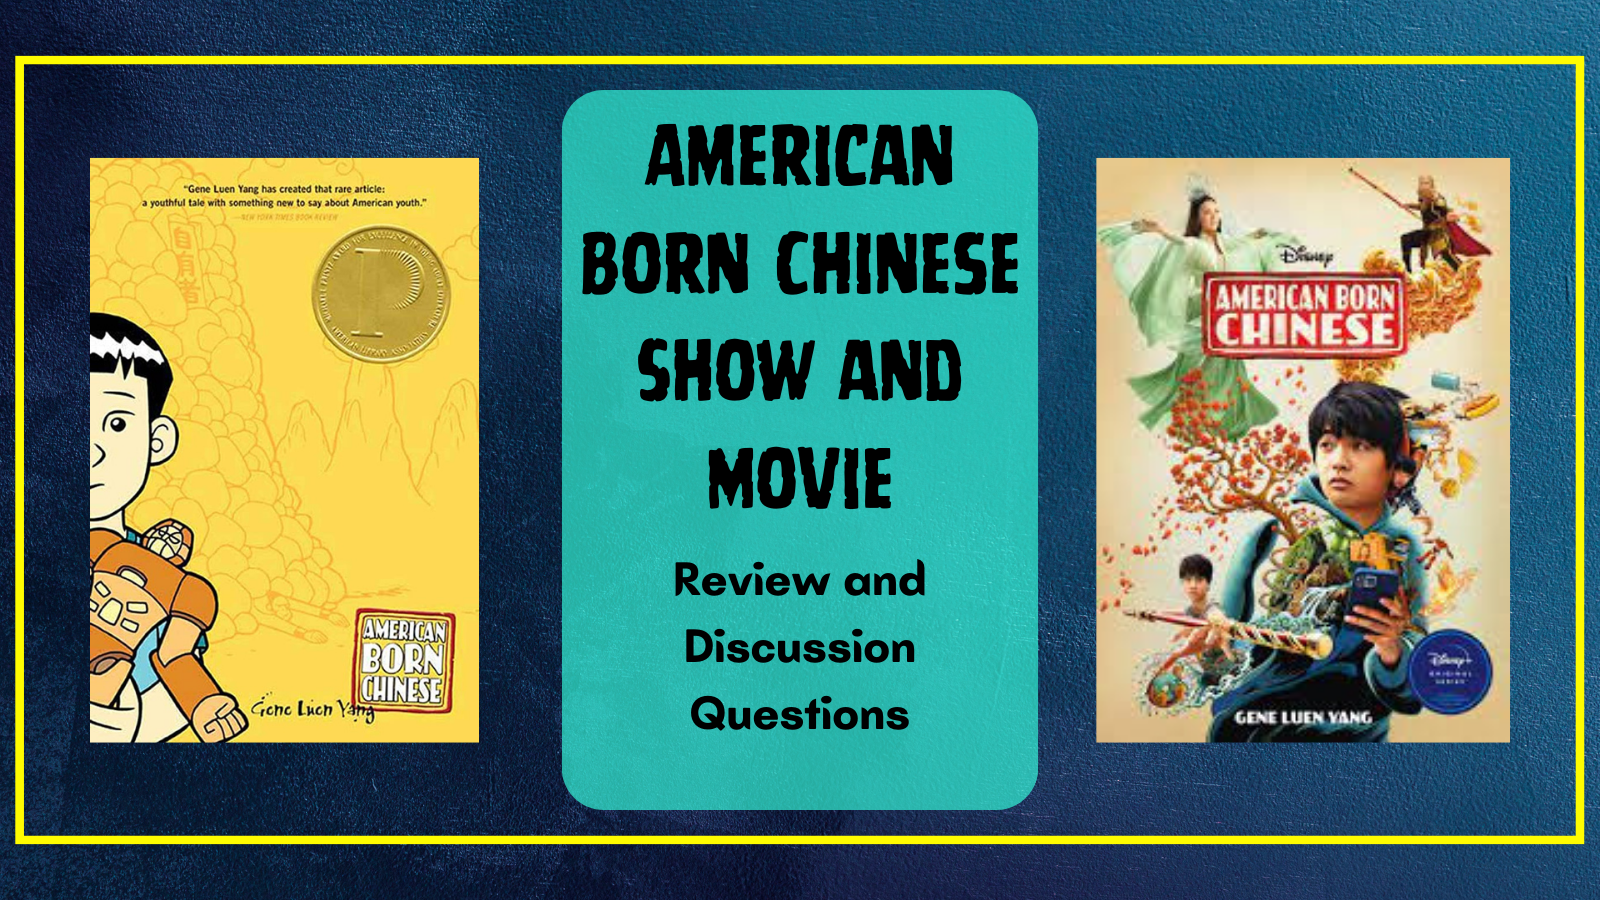 American Born Chinese Show and Movie